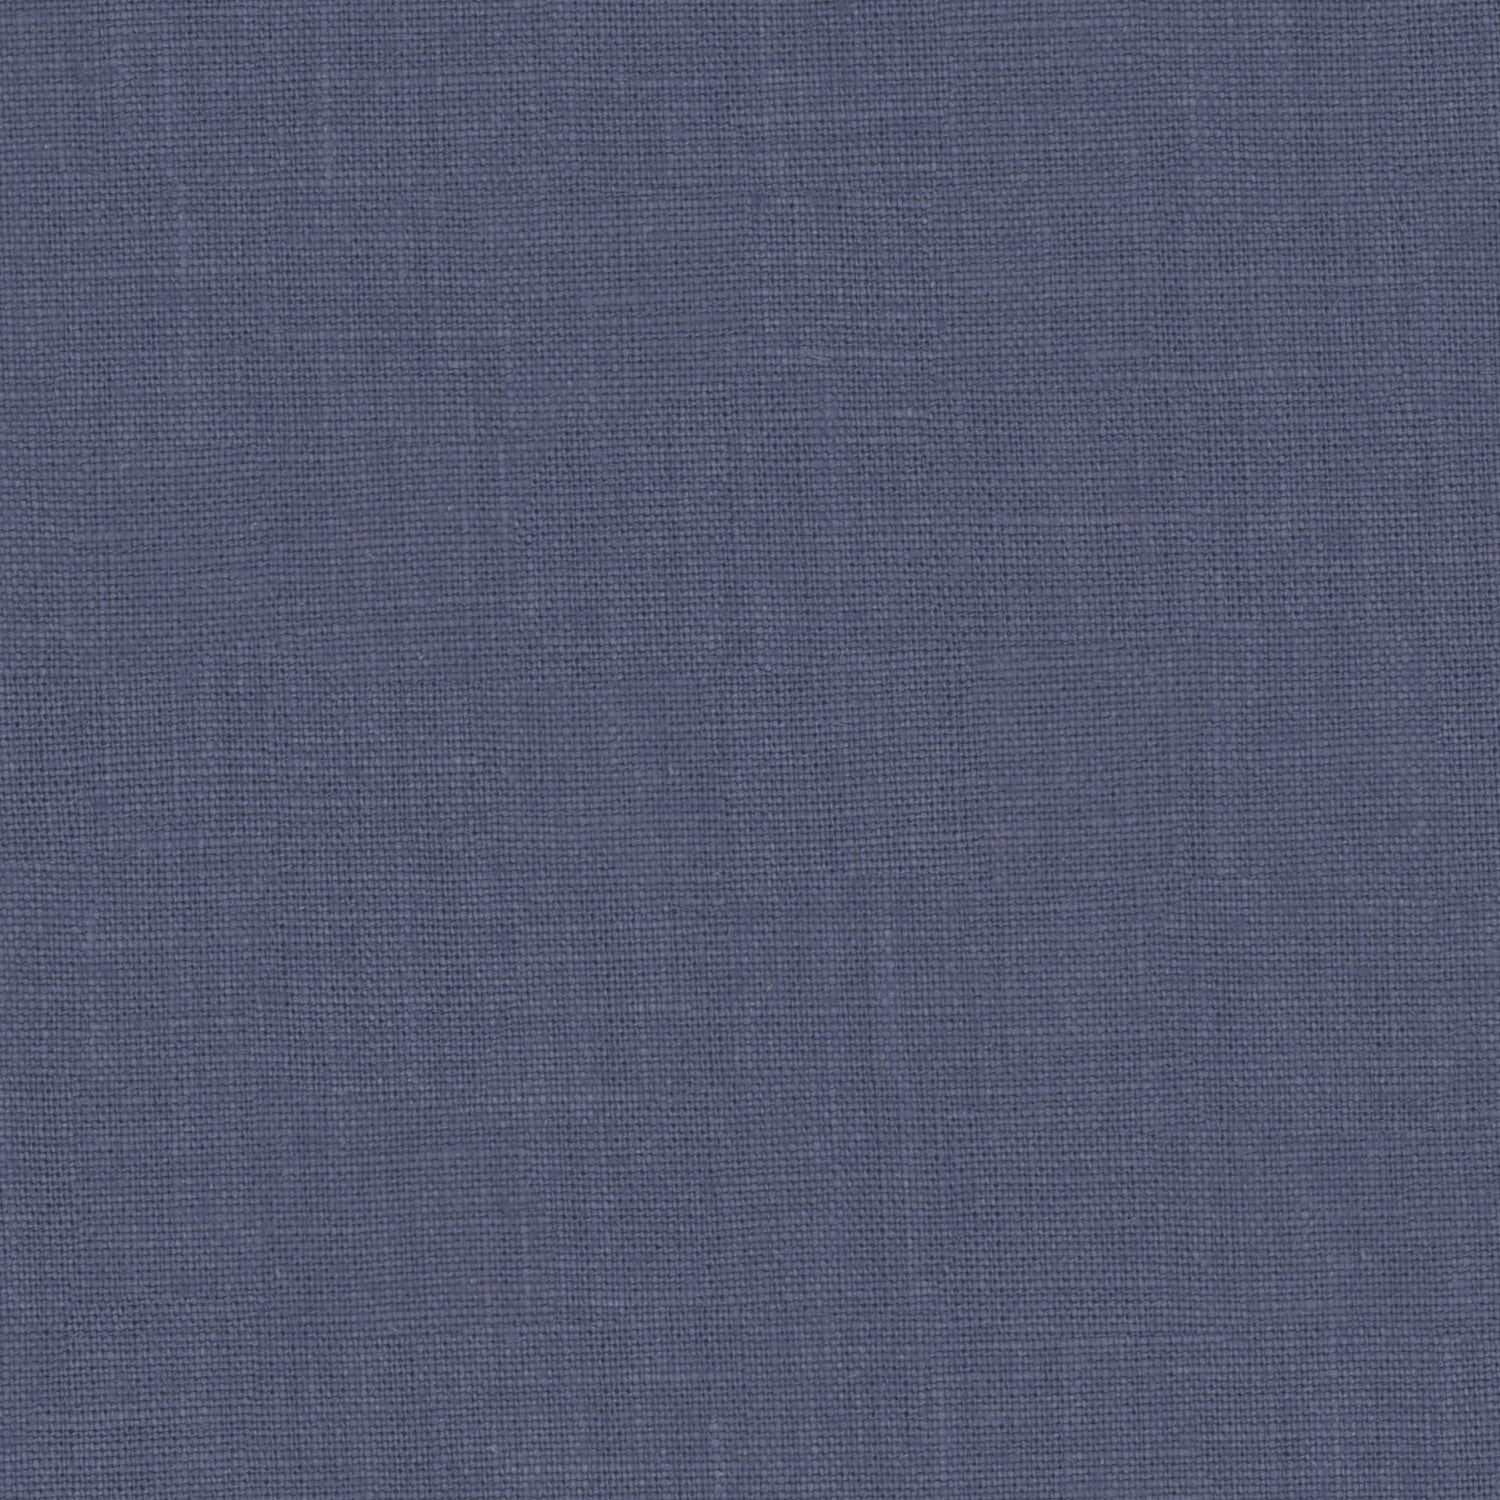 CAMPBELL Blue Jean Woven Fabric - Warner House